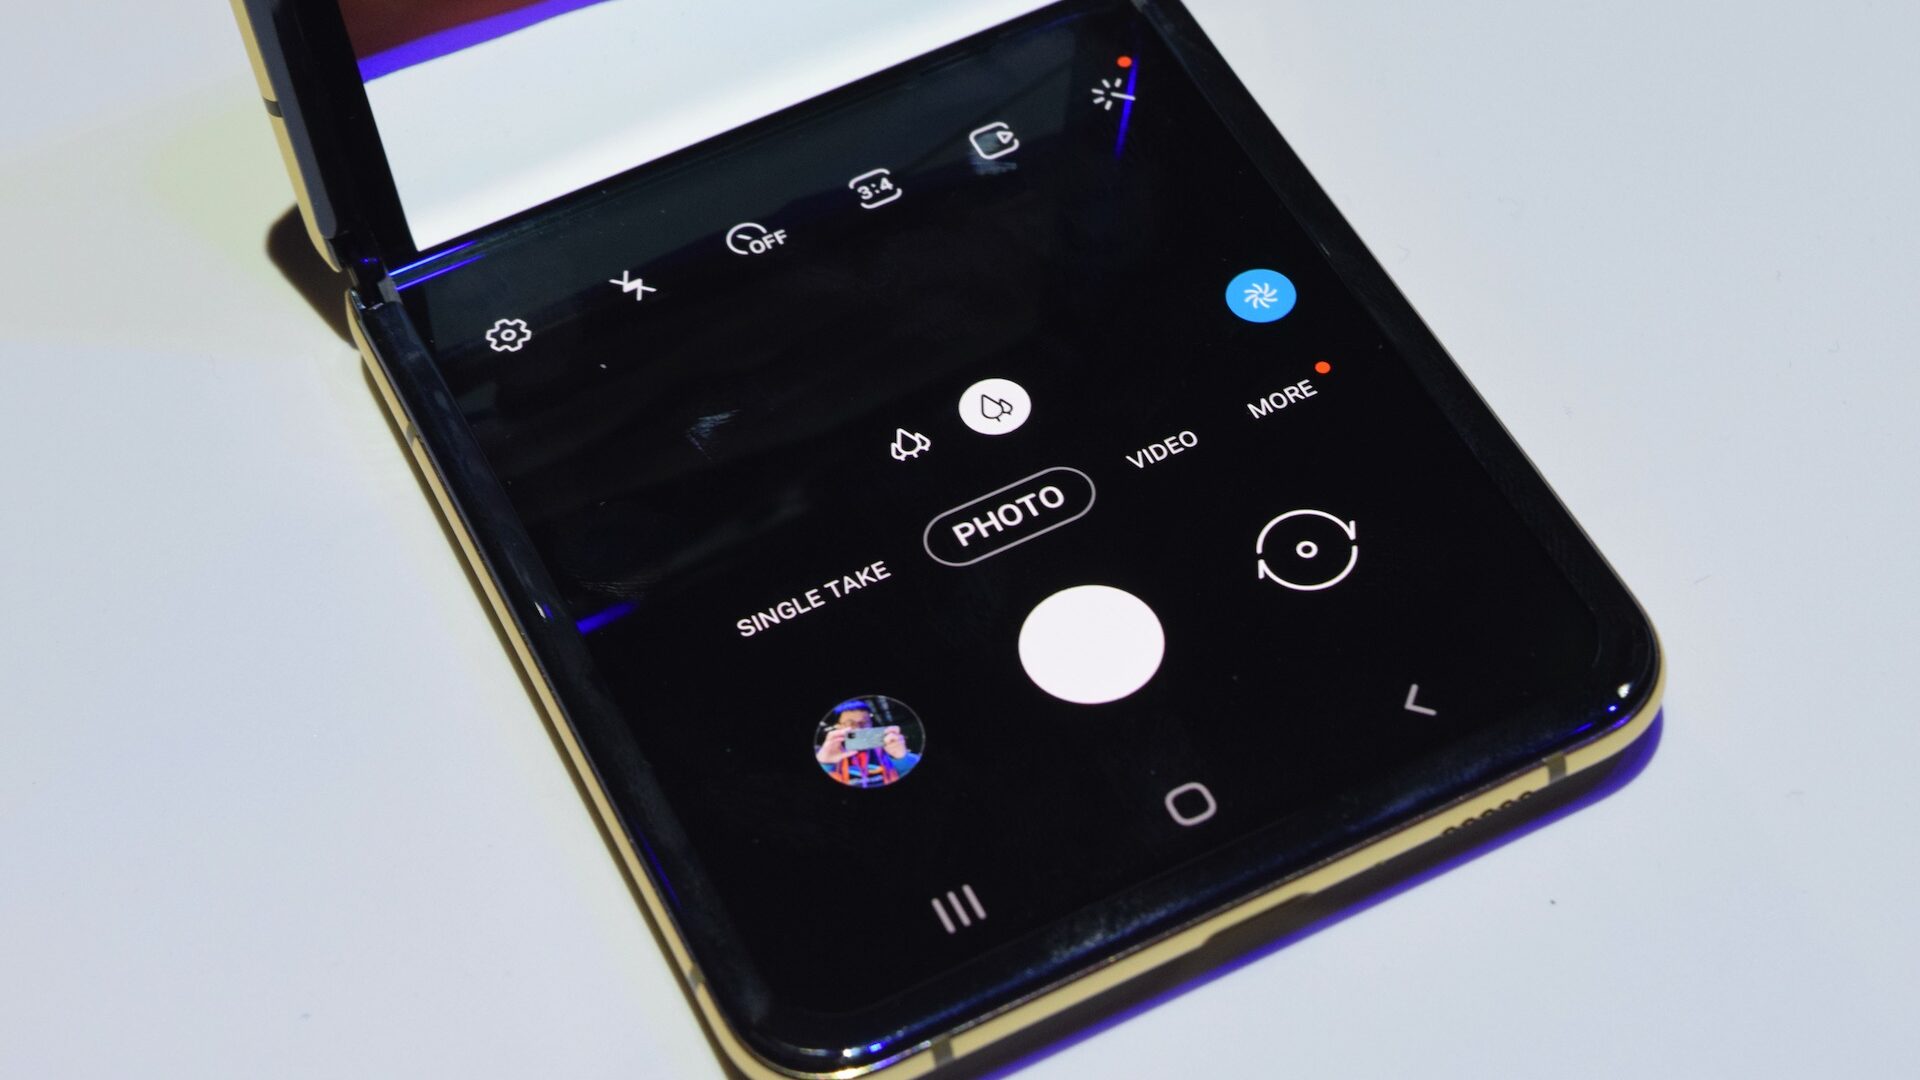 Samsung Gallery update brings video previews and more features - SamMobile